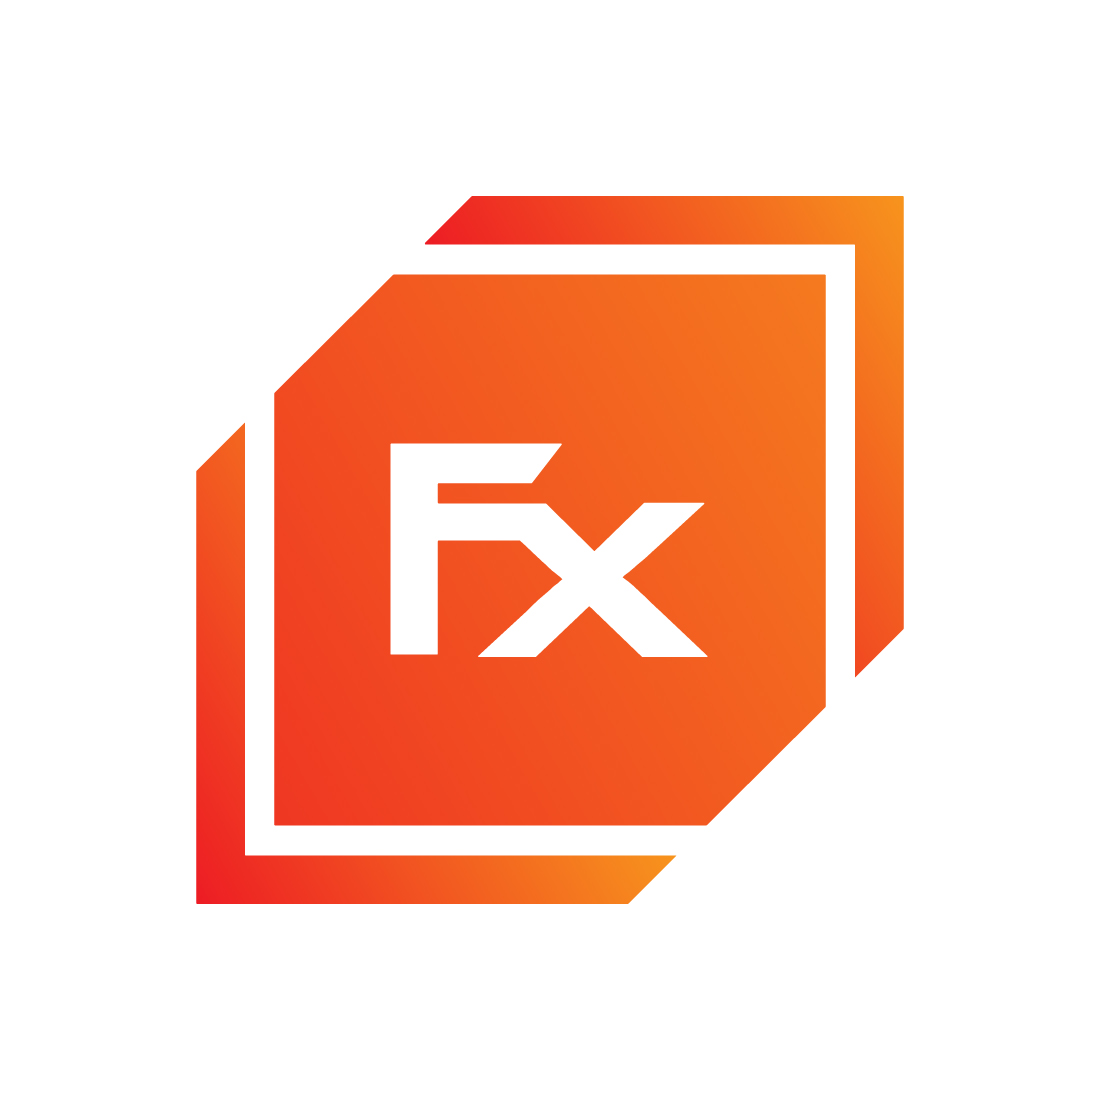 Initials FX letters logo design vector template arts XF logo orange and white color icon FX best company identity preview image.